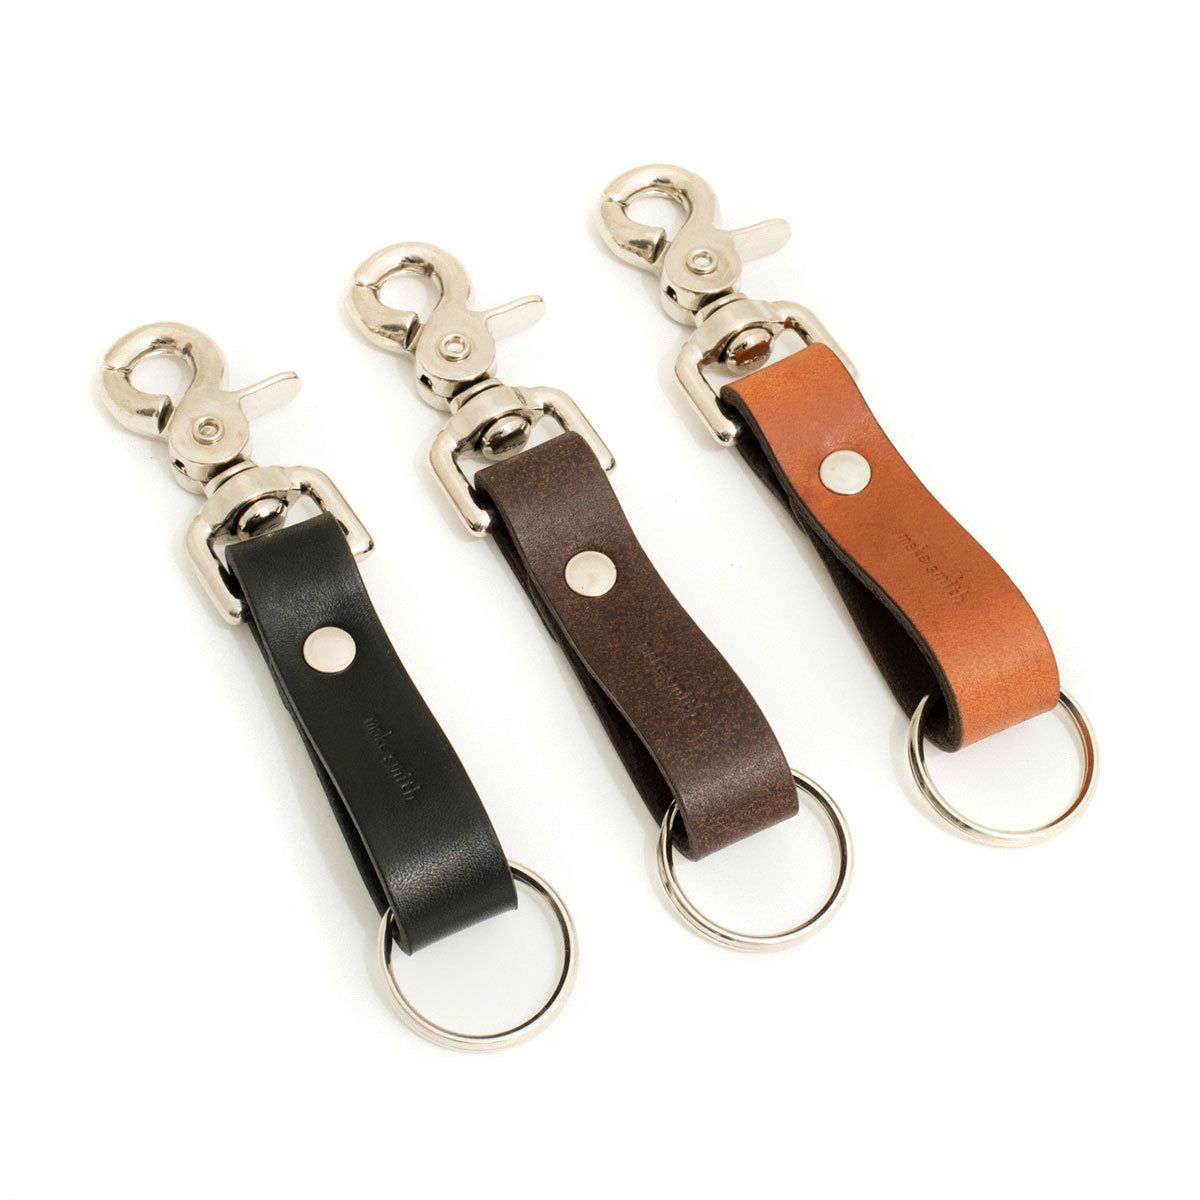 LEATHER KEY CHAIN WITH CLIP :: Handmade in the USA by Make Smith